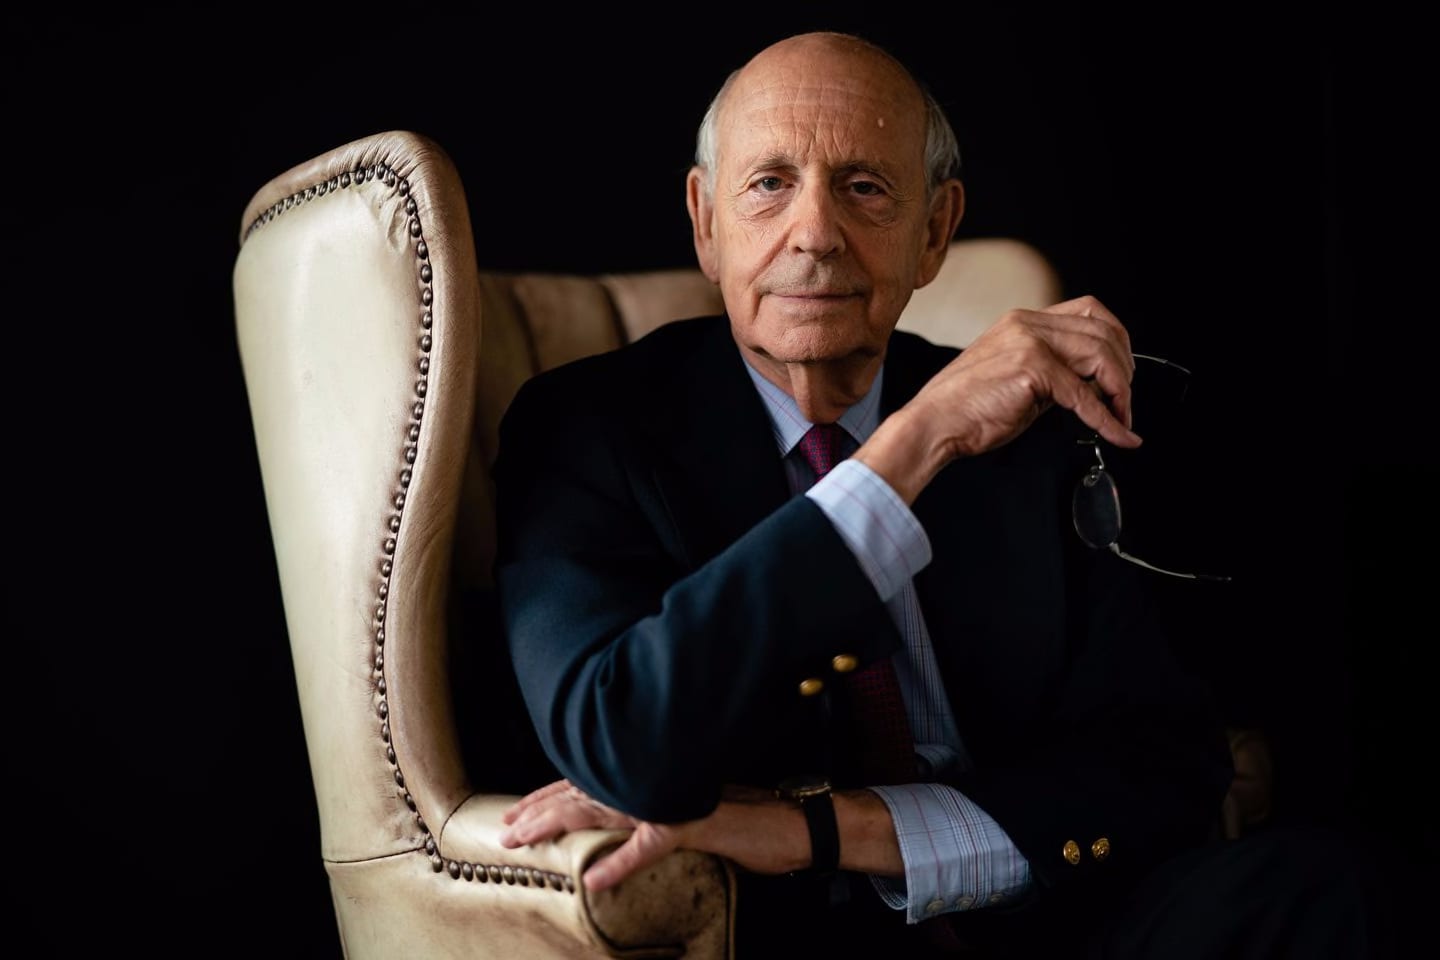 Supreme Court Justice Stephen Breyer sat for a portrait in Washington on Thursday. Justice Breyer said he is struggling to decide when to retire from the Supreme Court and is taking account of a host of factors, including who will name his successor.